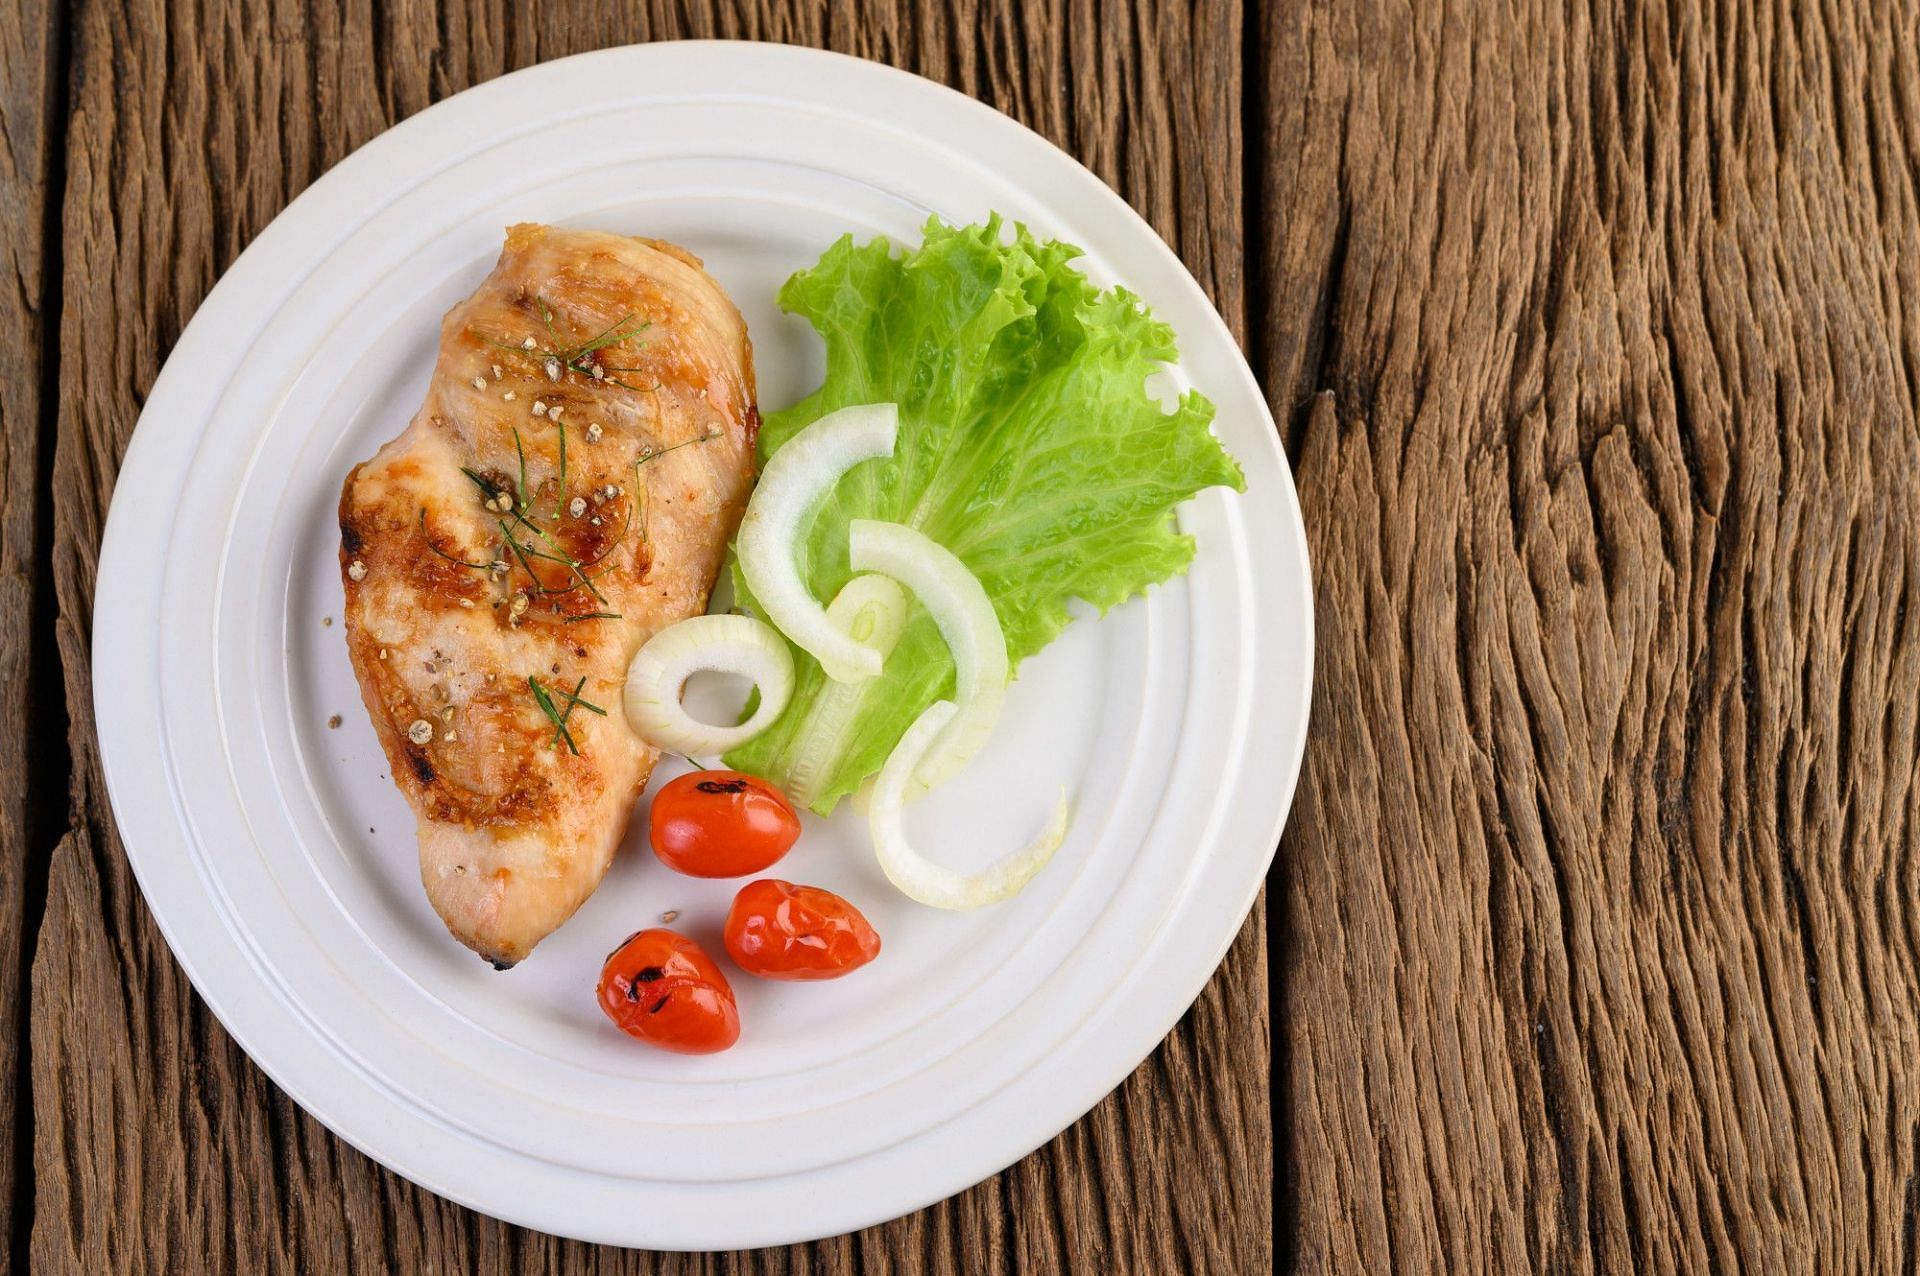 Chicken breast is an excellent source of protein. (Image via Freepik)